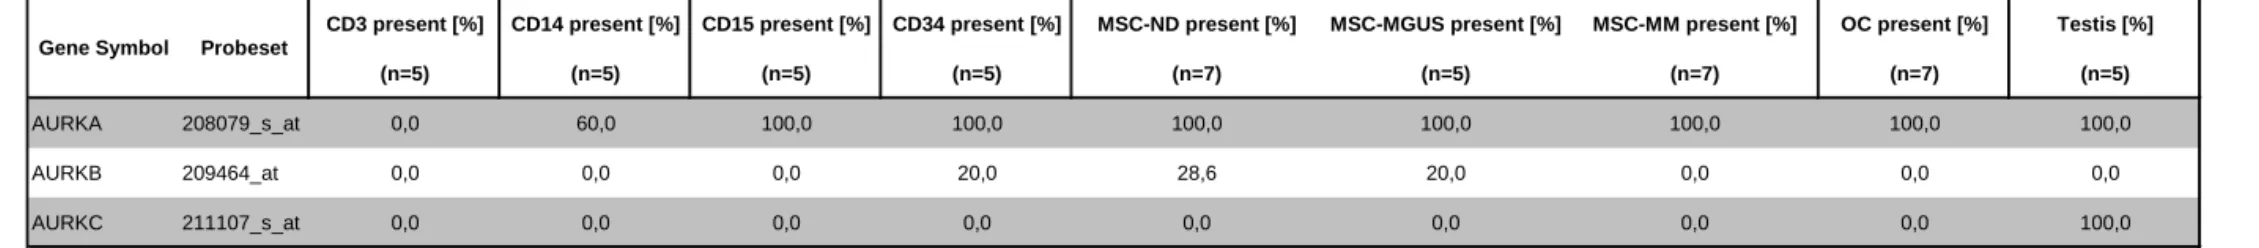 Table 2. Presence of expression of Aurora-kinase A (AURKA), -B (AURKB), -C (AURKC) as judged by PANP in subfractions  of the bone marrow (mesenchymal stromal cells (MSC) from normal donors (ND-MSC), patients with monoclonal gammopathy of  unknown significa